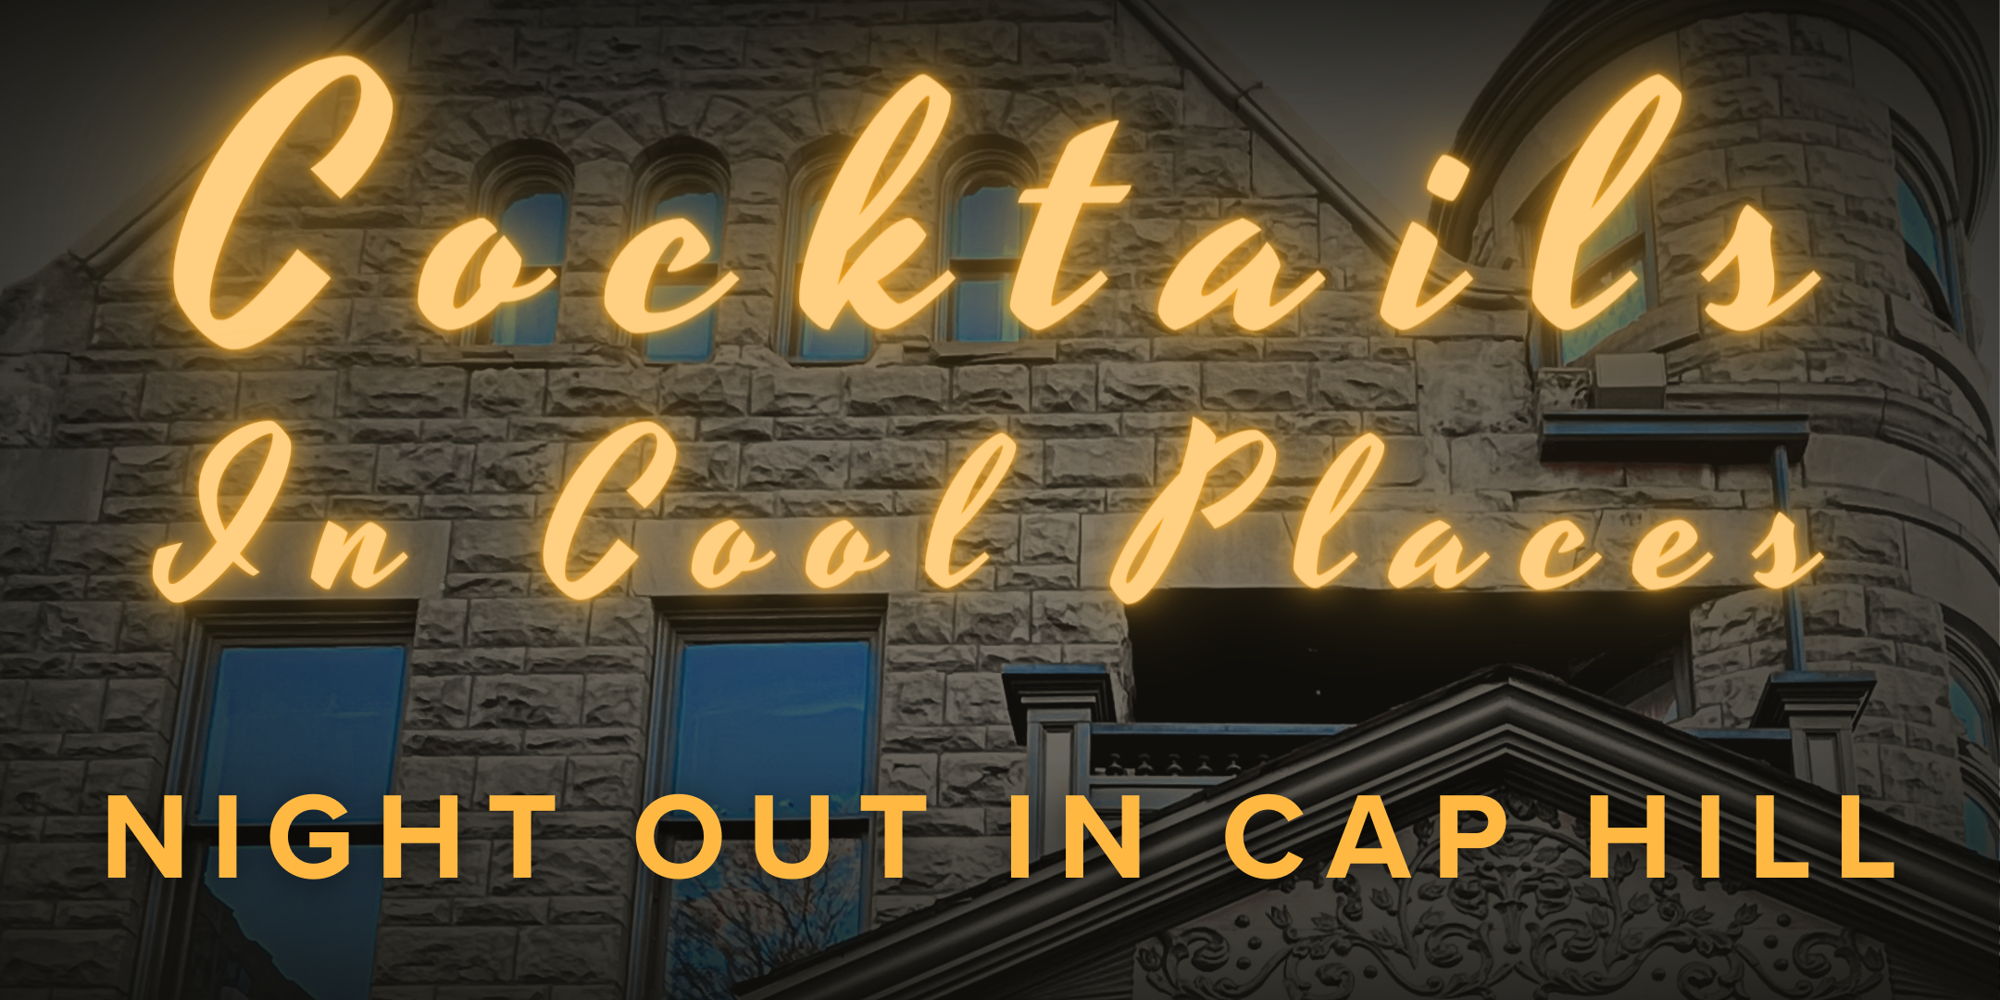 Cocktails in Cool Places: Night Out In Capitol Hill promotional image